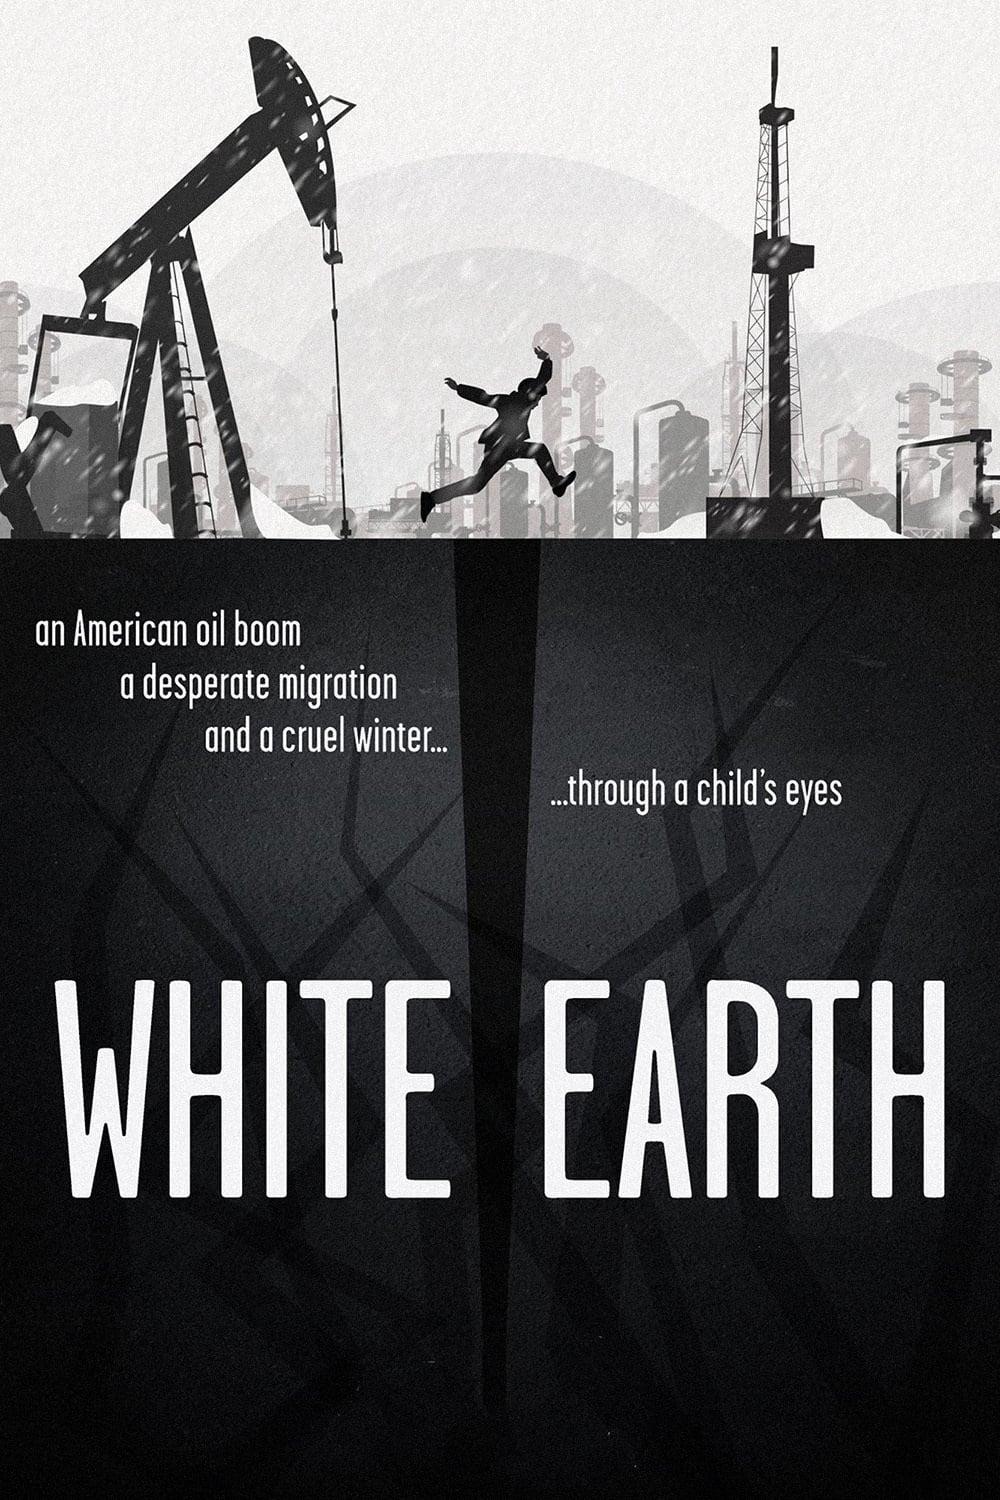 White Earth poster